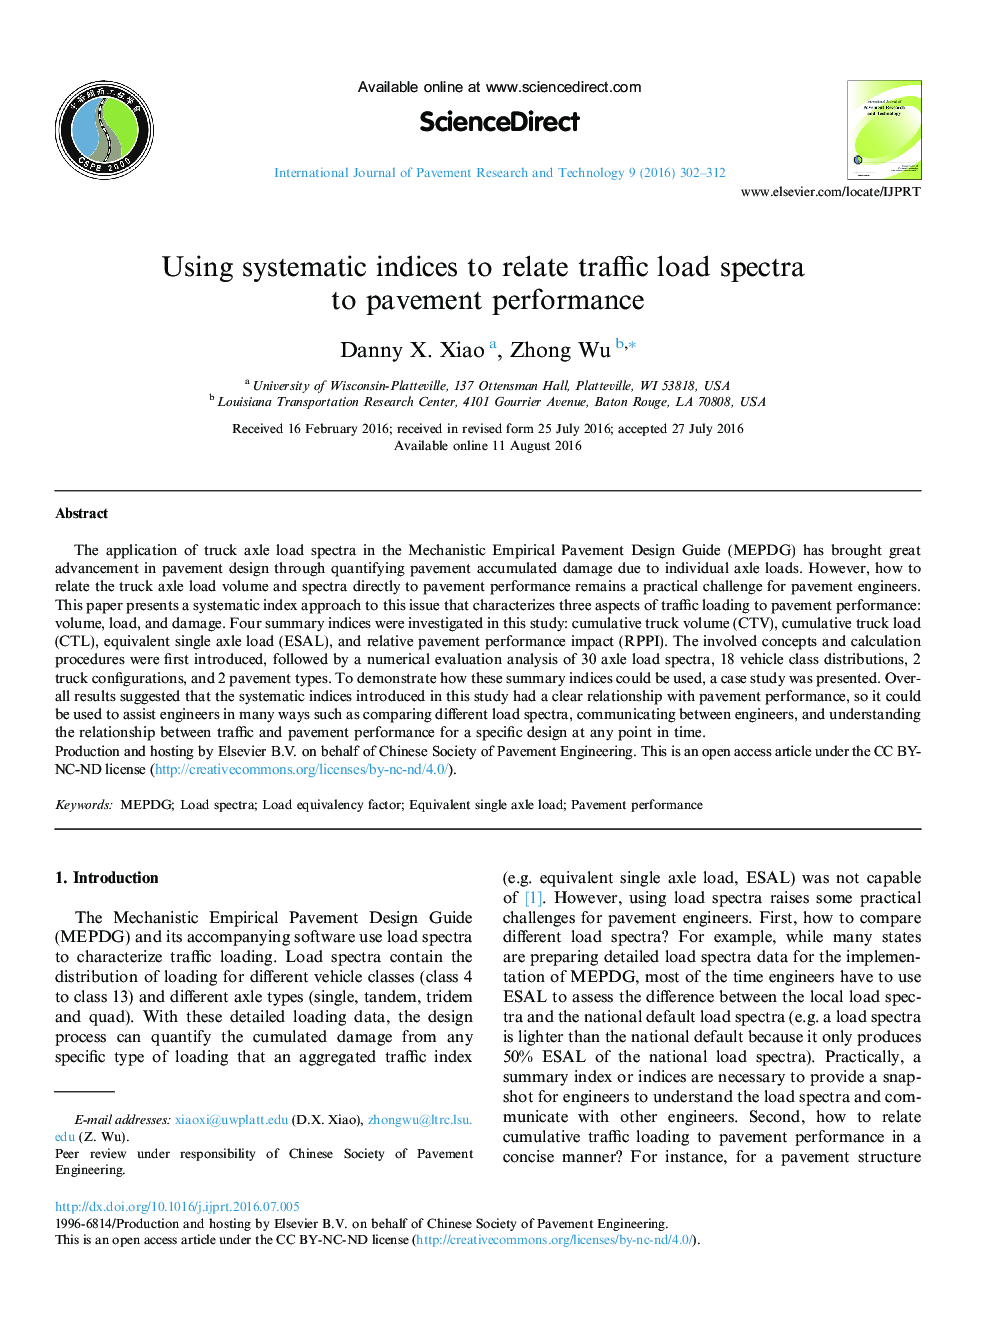 Using systematic indices to relate traffic load spectra to pavement performance